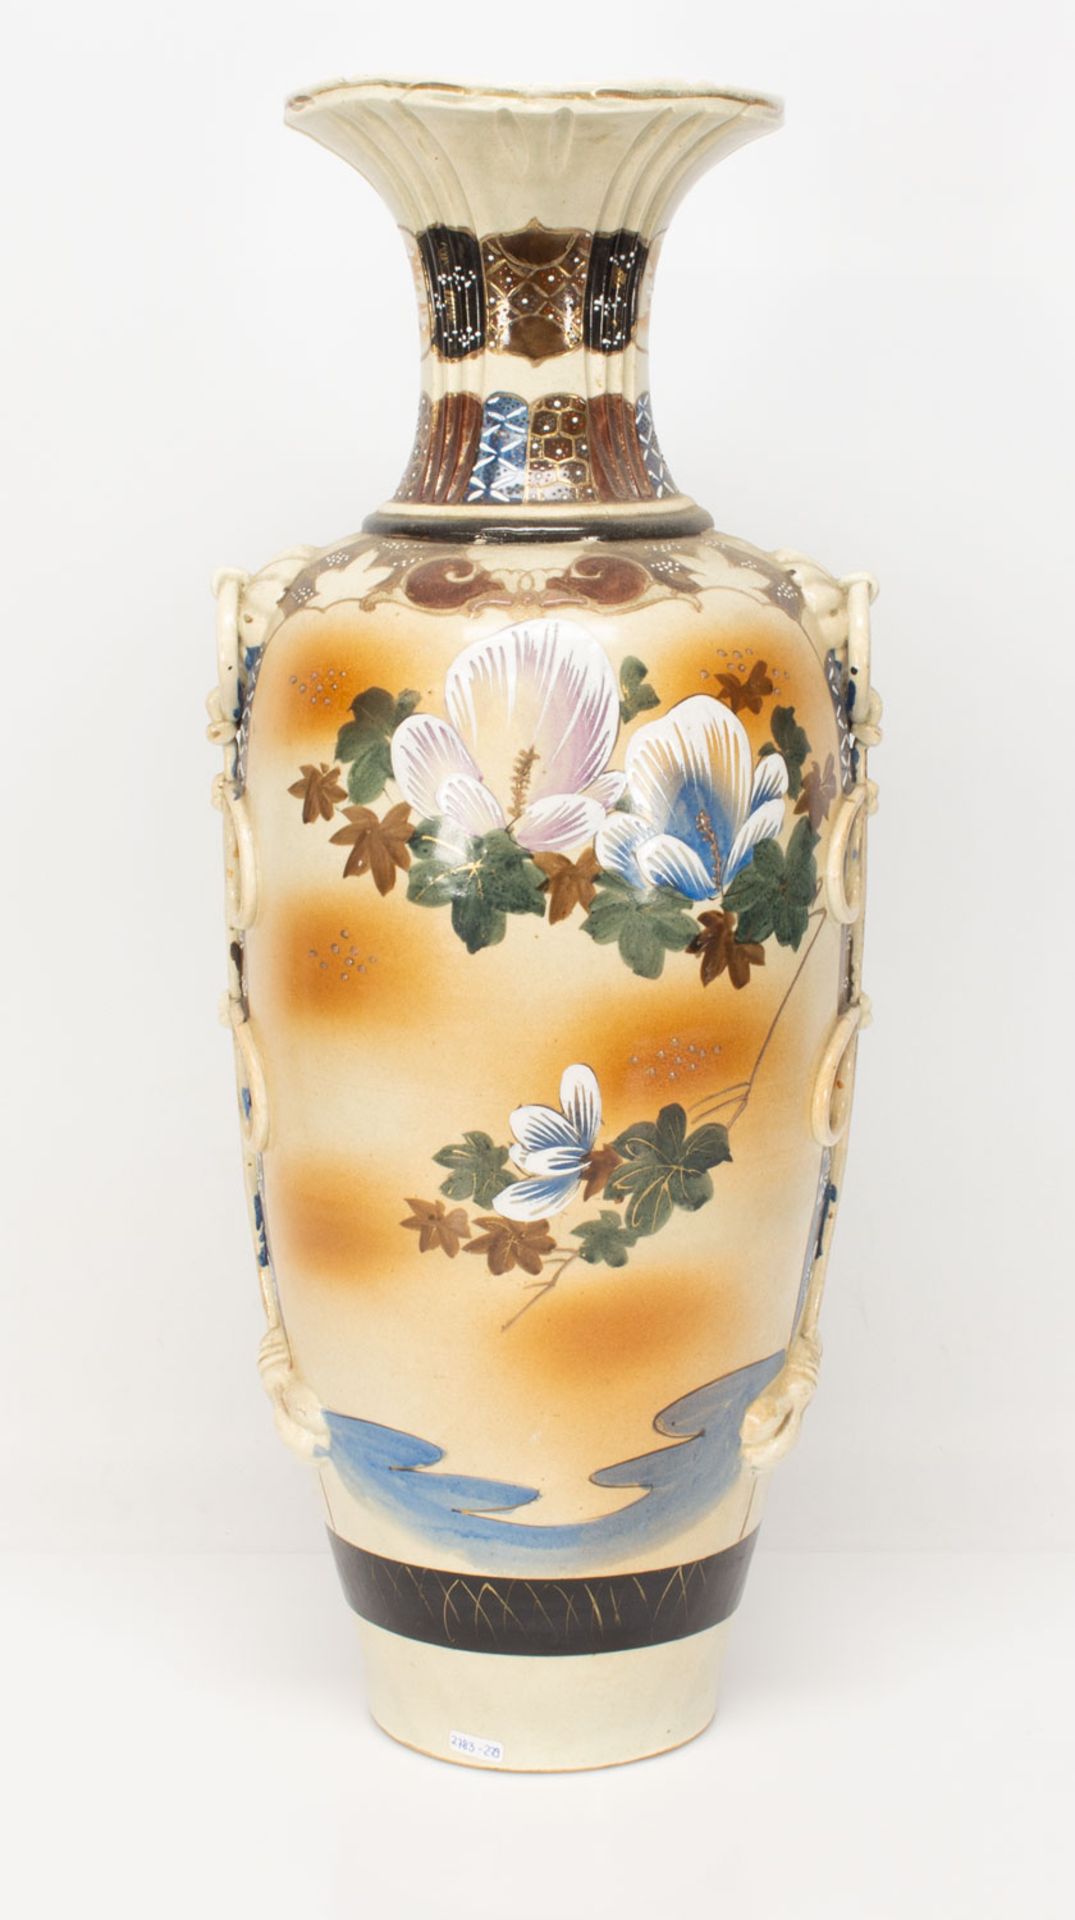 Bodenvase - Image 3 of 4